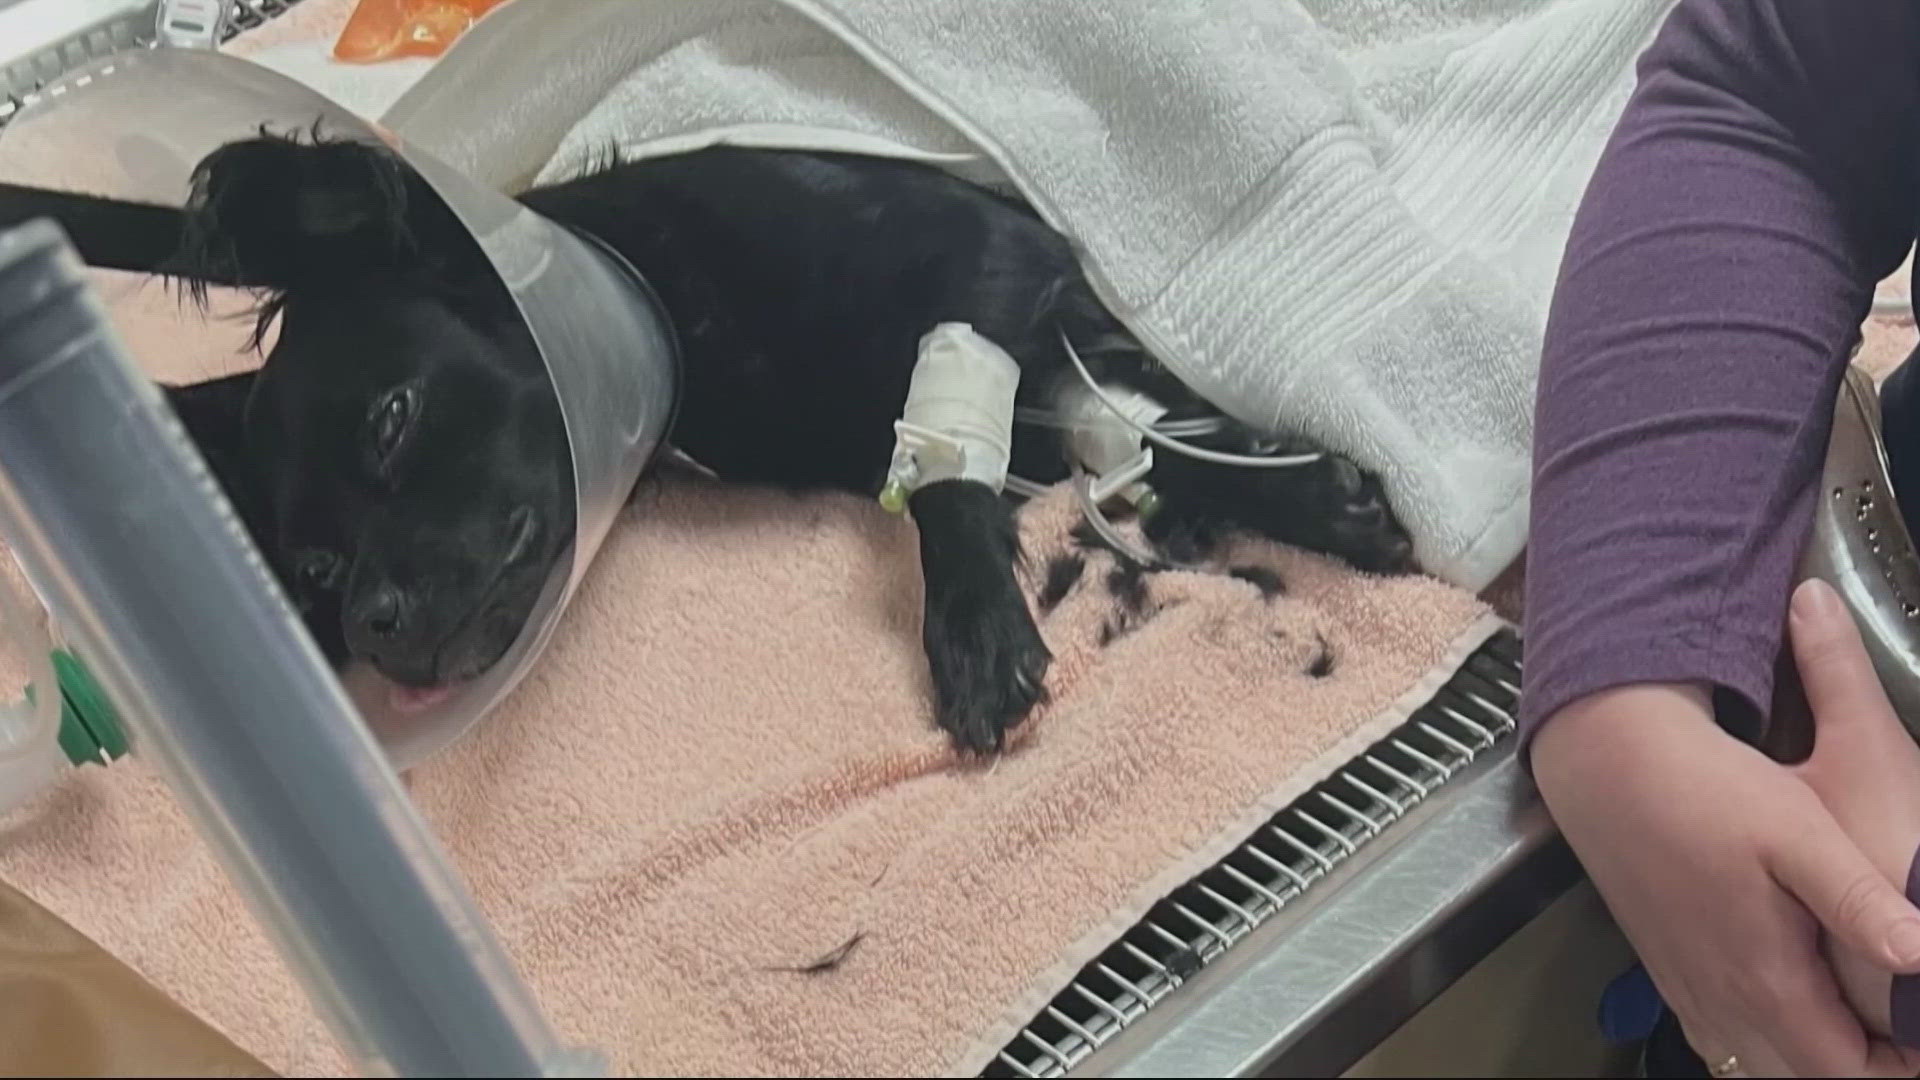 A Portland couple is frustrated after a pitbull attacked their puppy, who required emergency surgery, and ran off.